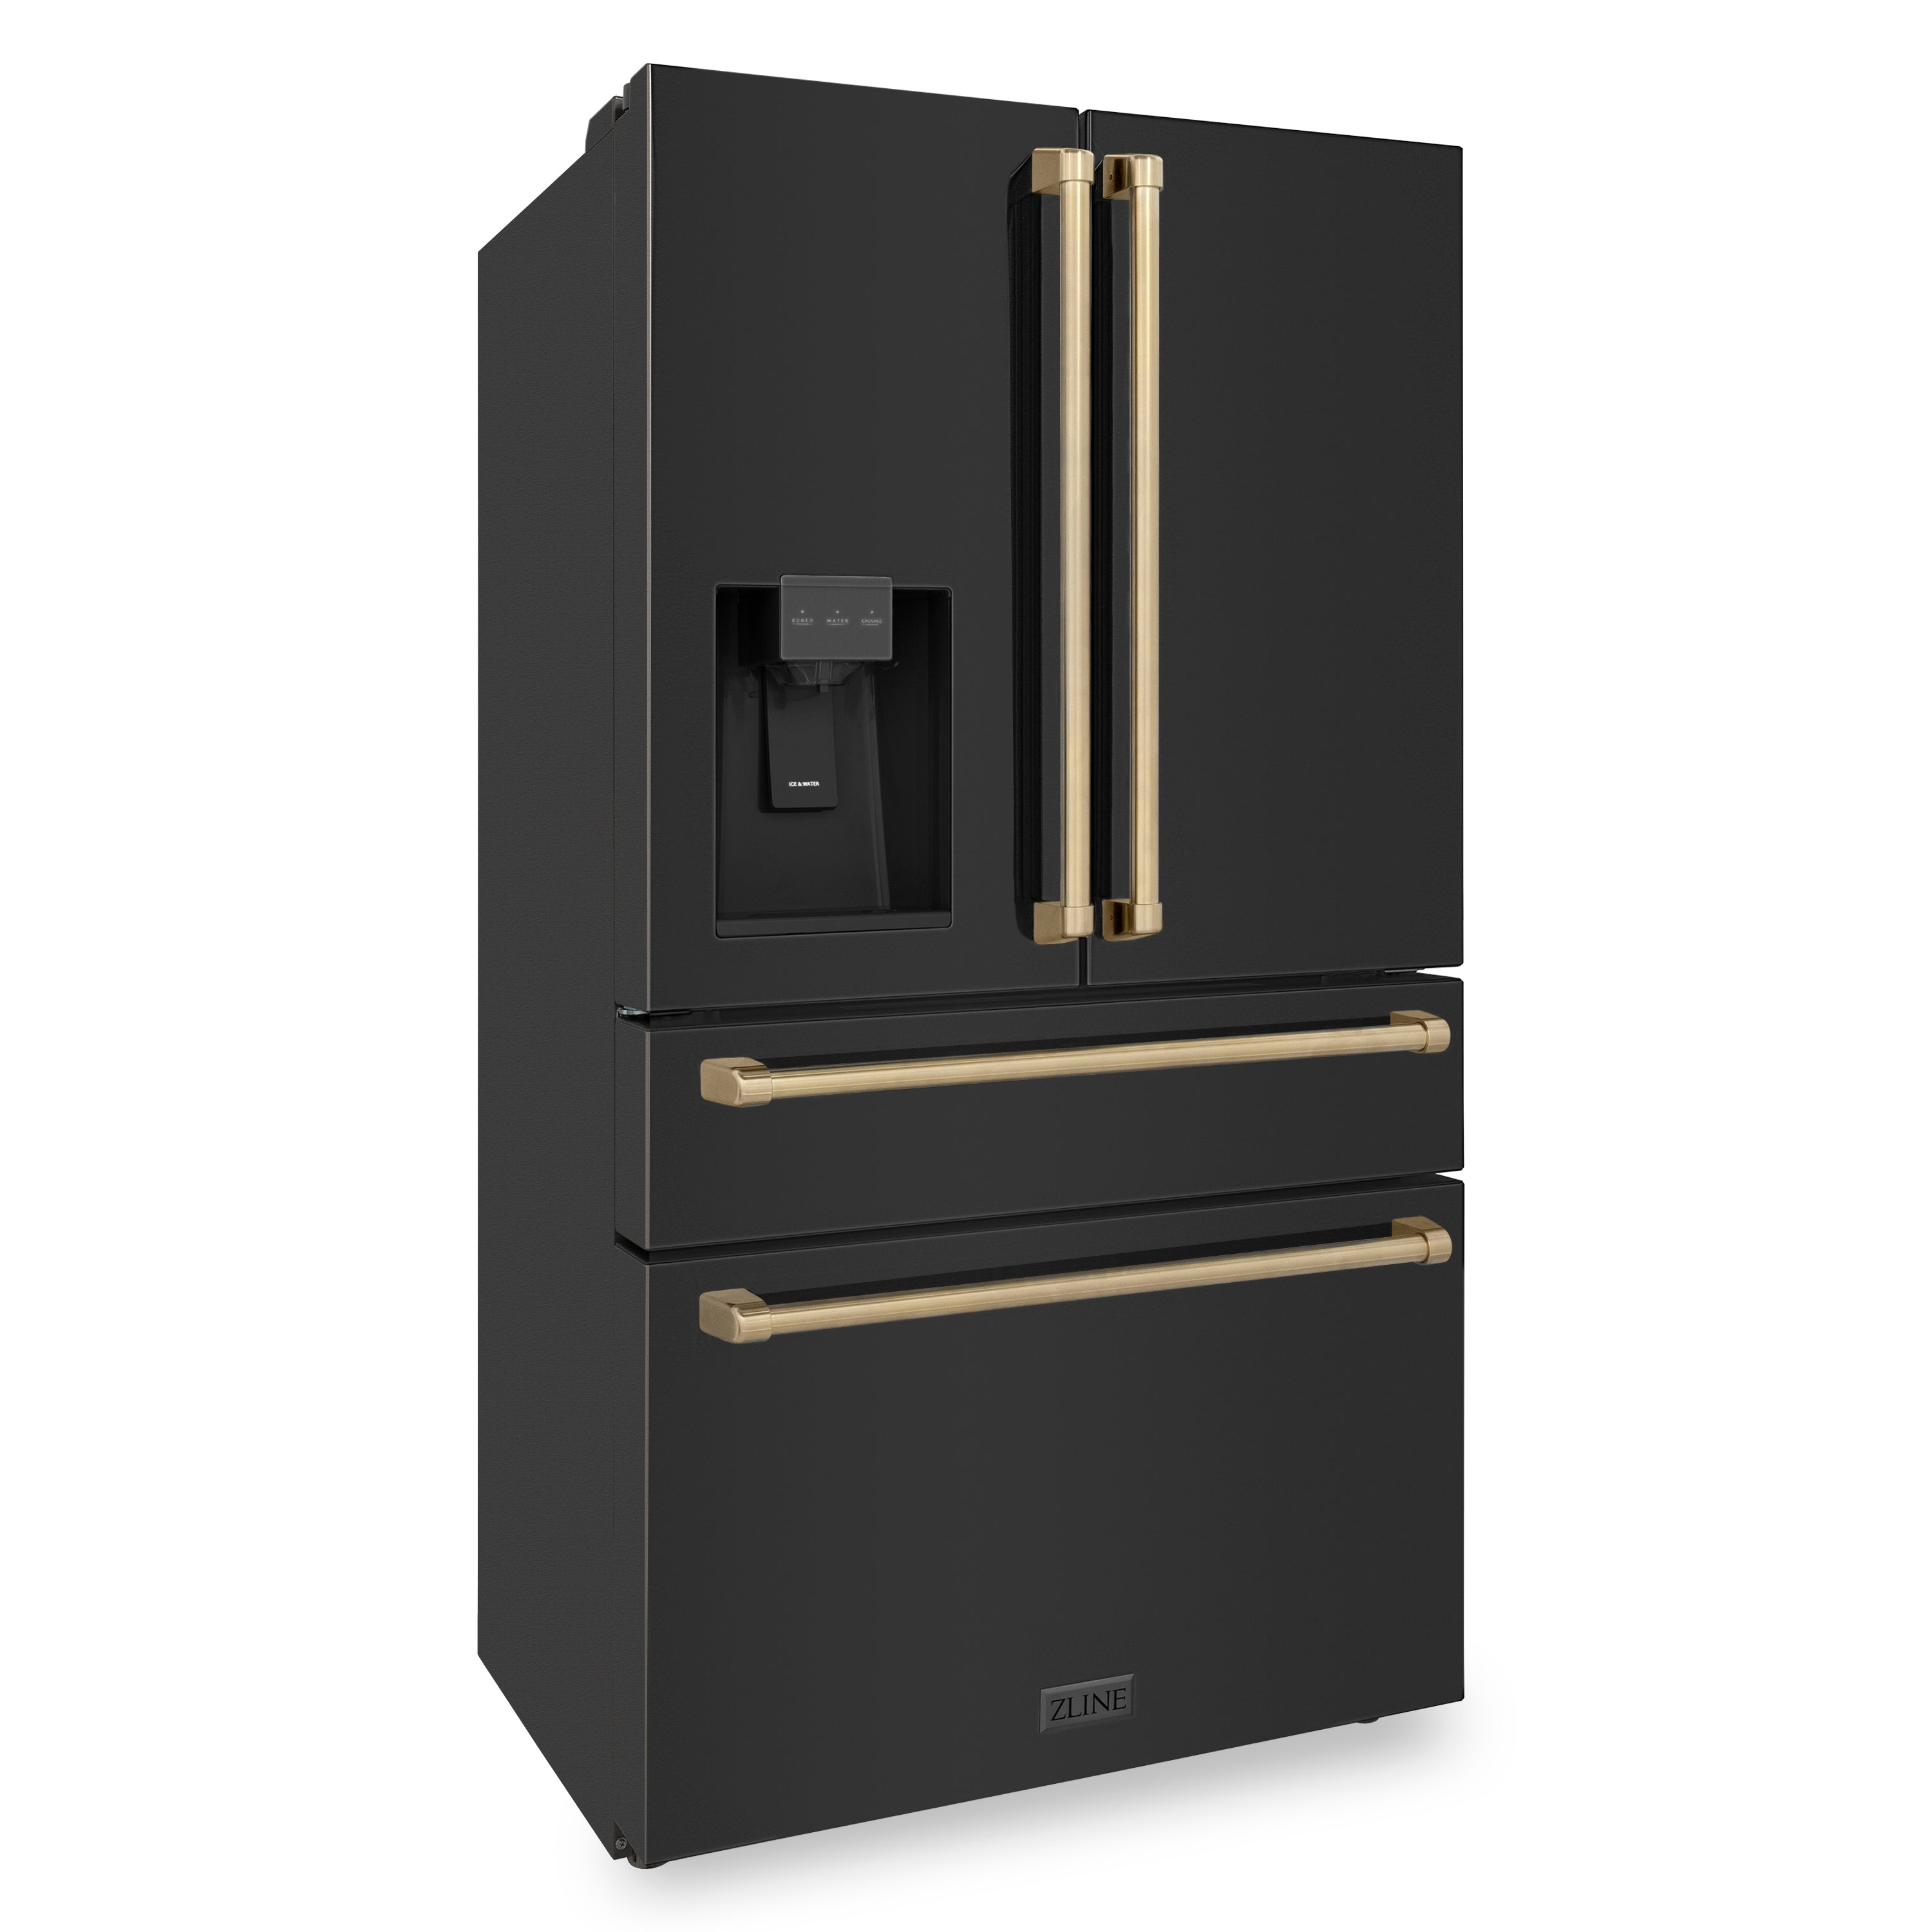 ZLINE 36" Autograph Edition 21.6 cu. ft Freestanding French Door Refrigerator with Water and Ice Dispenser in Fingerprint Resistant Black Stainless Steel with Accents (RFMZ-W-36-BS)